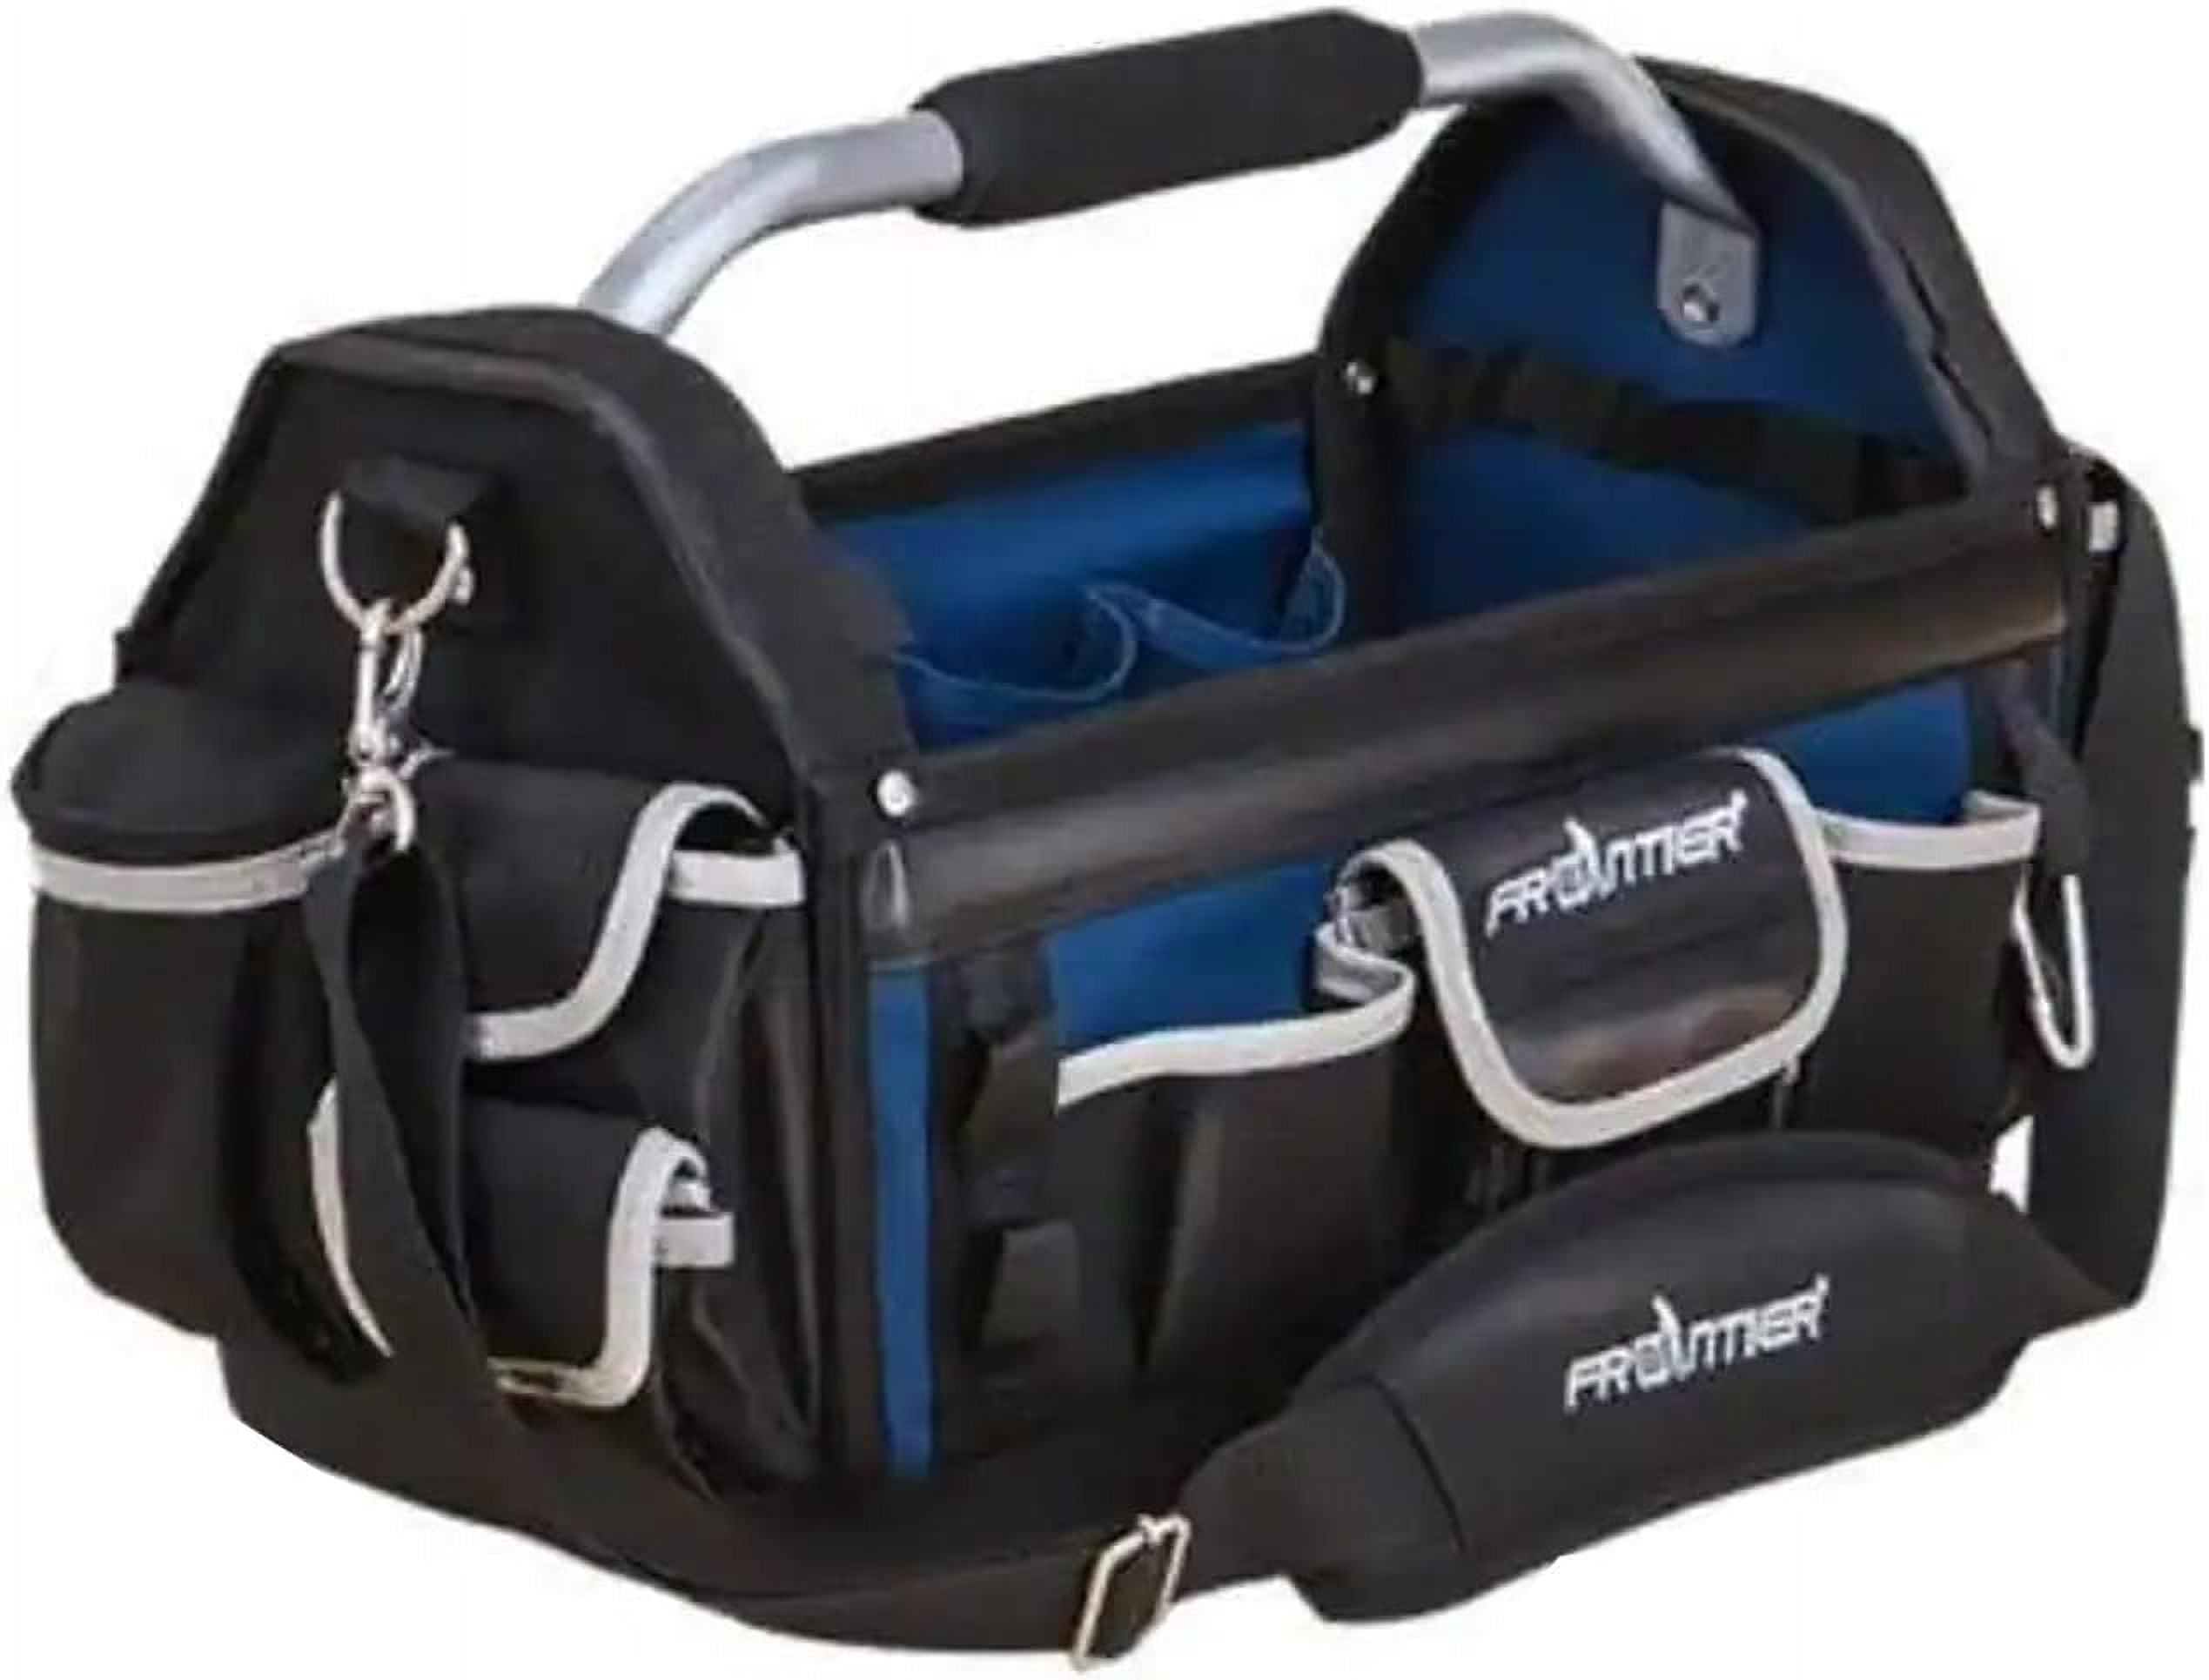 Outils Oceans tool bag at Upffront